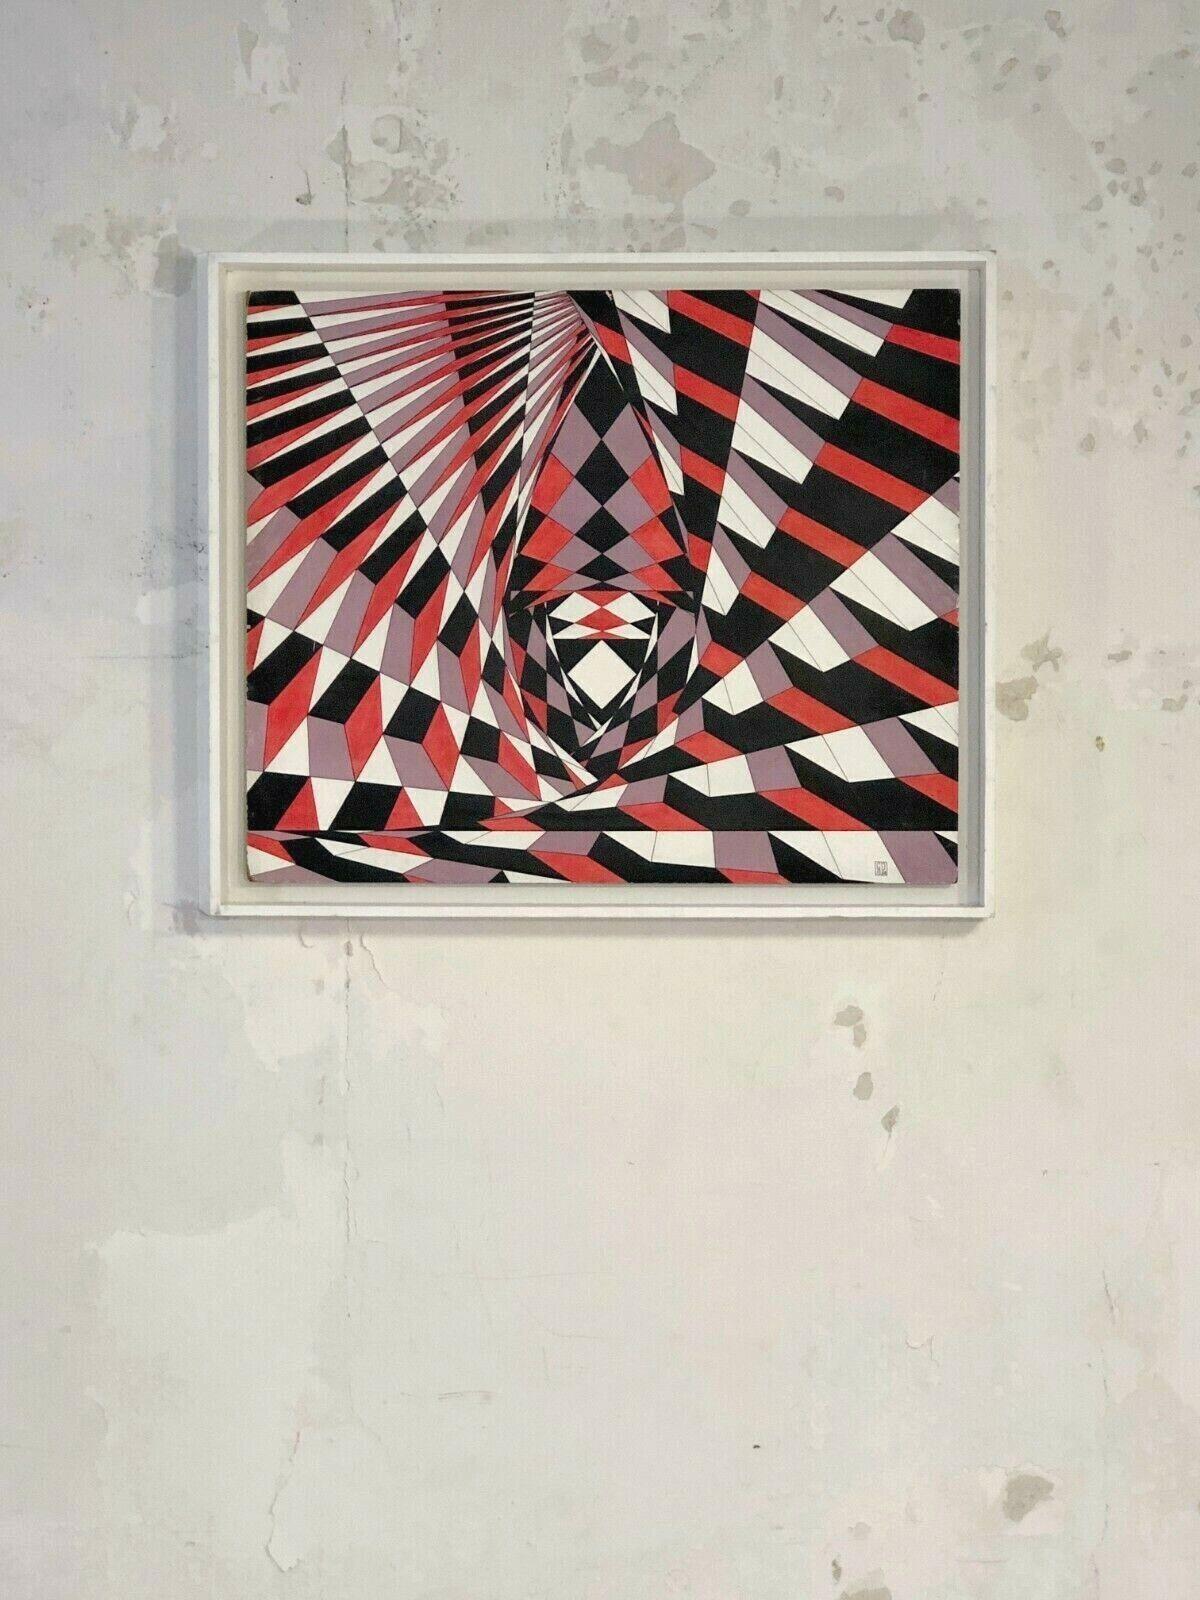 An authentic kinetic painting, Post-Modernist, Abstract Geometric, Op-Art, composition of red, purple and black geometric shapes on panel in its original American box in white lacquered wood, titled 